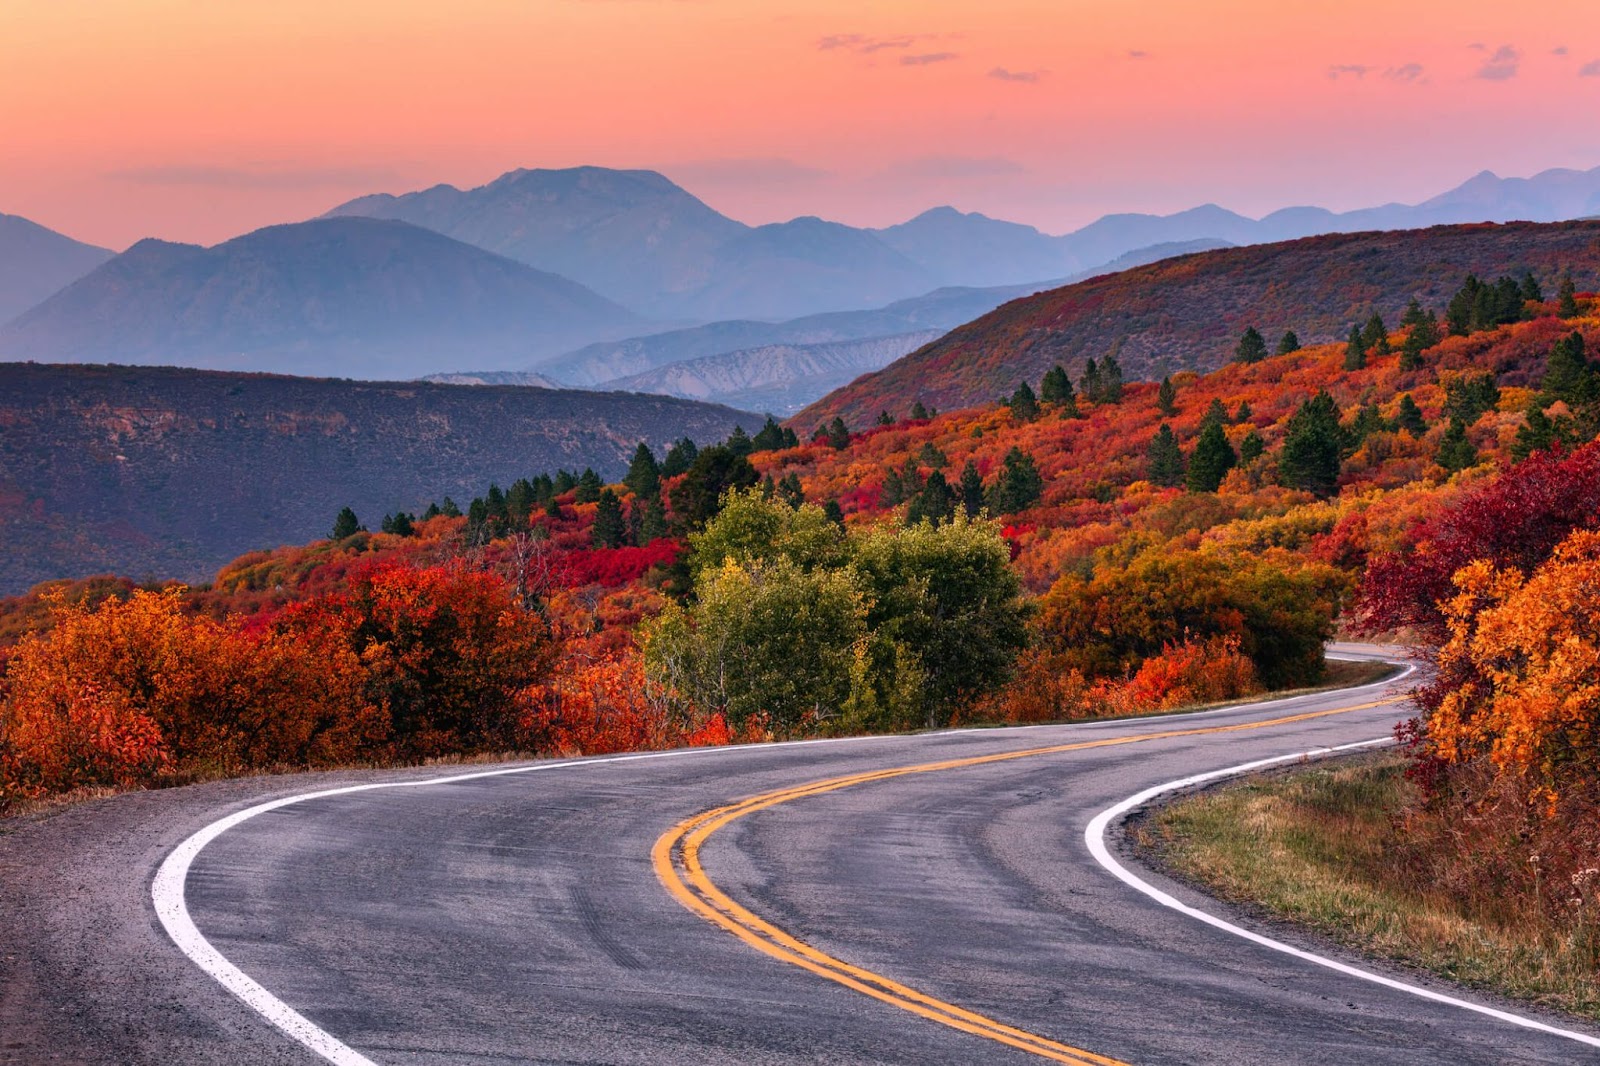 Autumn trees lining the winding road through the mountains.